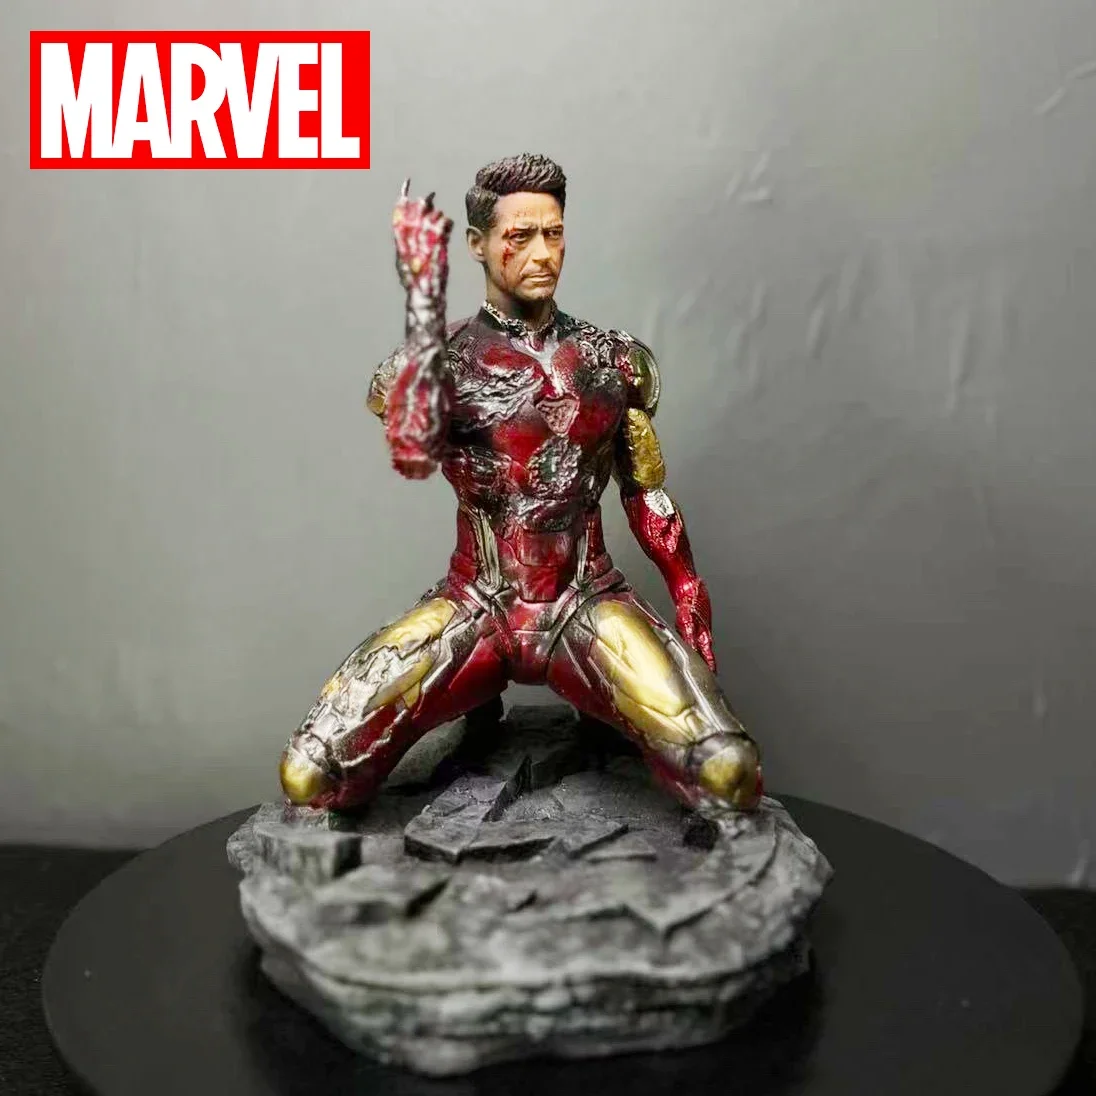 

Hot Marvel Illuminated Iron Man Finger Snapping Statues Action Figures Avengers Endgame Ironman Kneeling Doll Collectible Toys